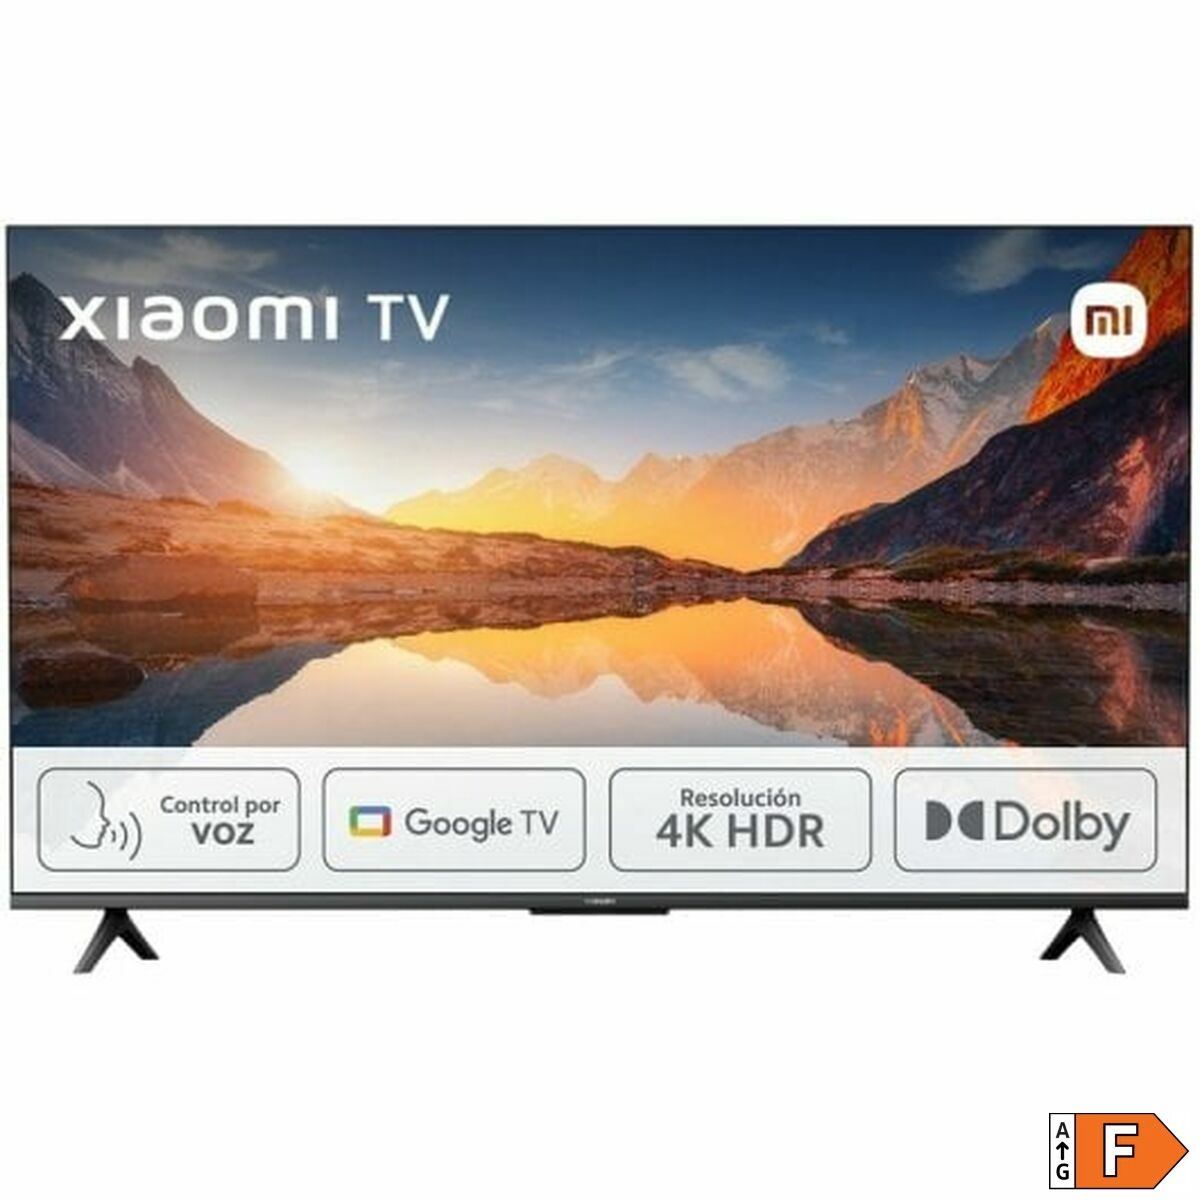 Smart TV Xiaomi A 2025 55" 4K Ultra HD LED, Xiaomi, Electronics, TV, Video and home cinema, smart-tv-xiaomi-a-2025-55-4k-ultra-hd-led, Brand_Xiaomi, category-reference-2609, category-reference-2625, category-reference-2931, category-reference-t-18805, category-reference-t-18827, category-reference-t-19653, cinema and television, Condition_NEW, entertainment, Price_400 - 500, RiotNook